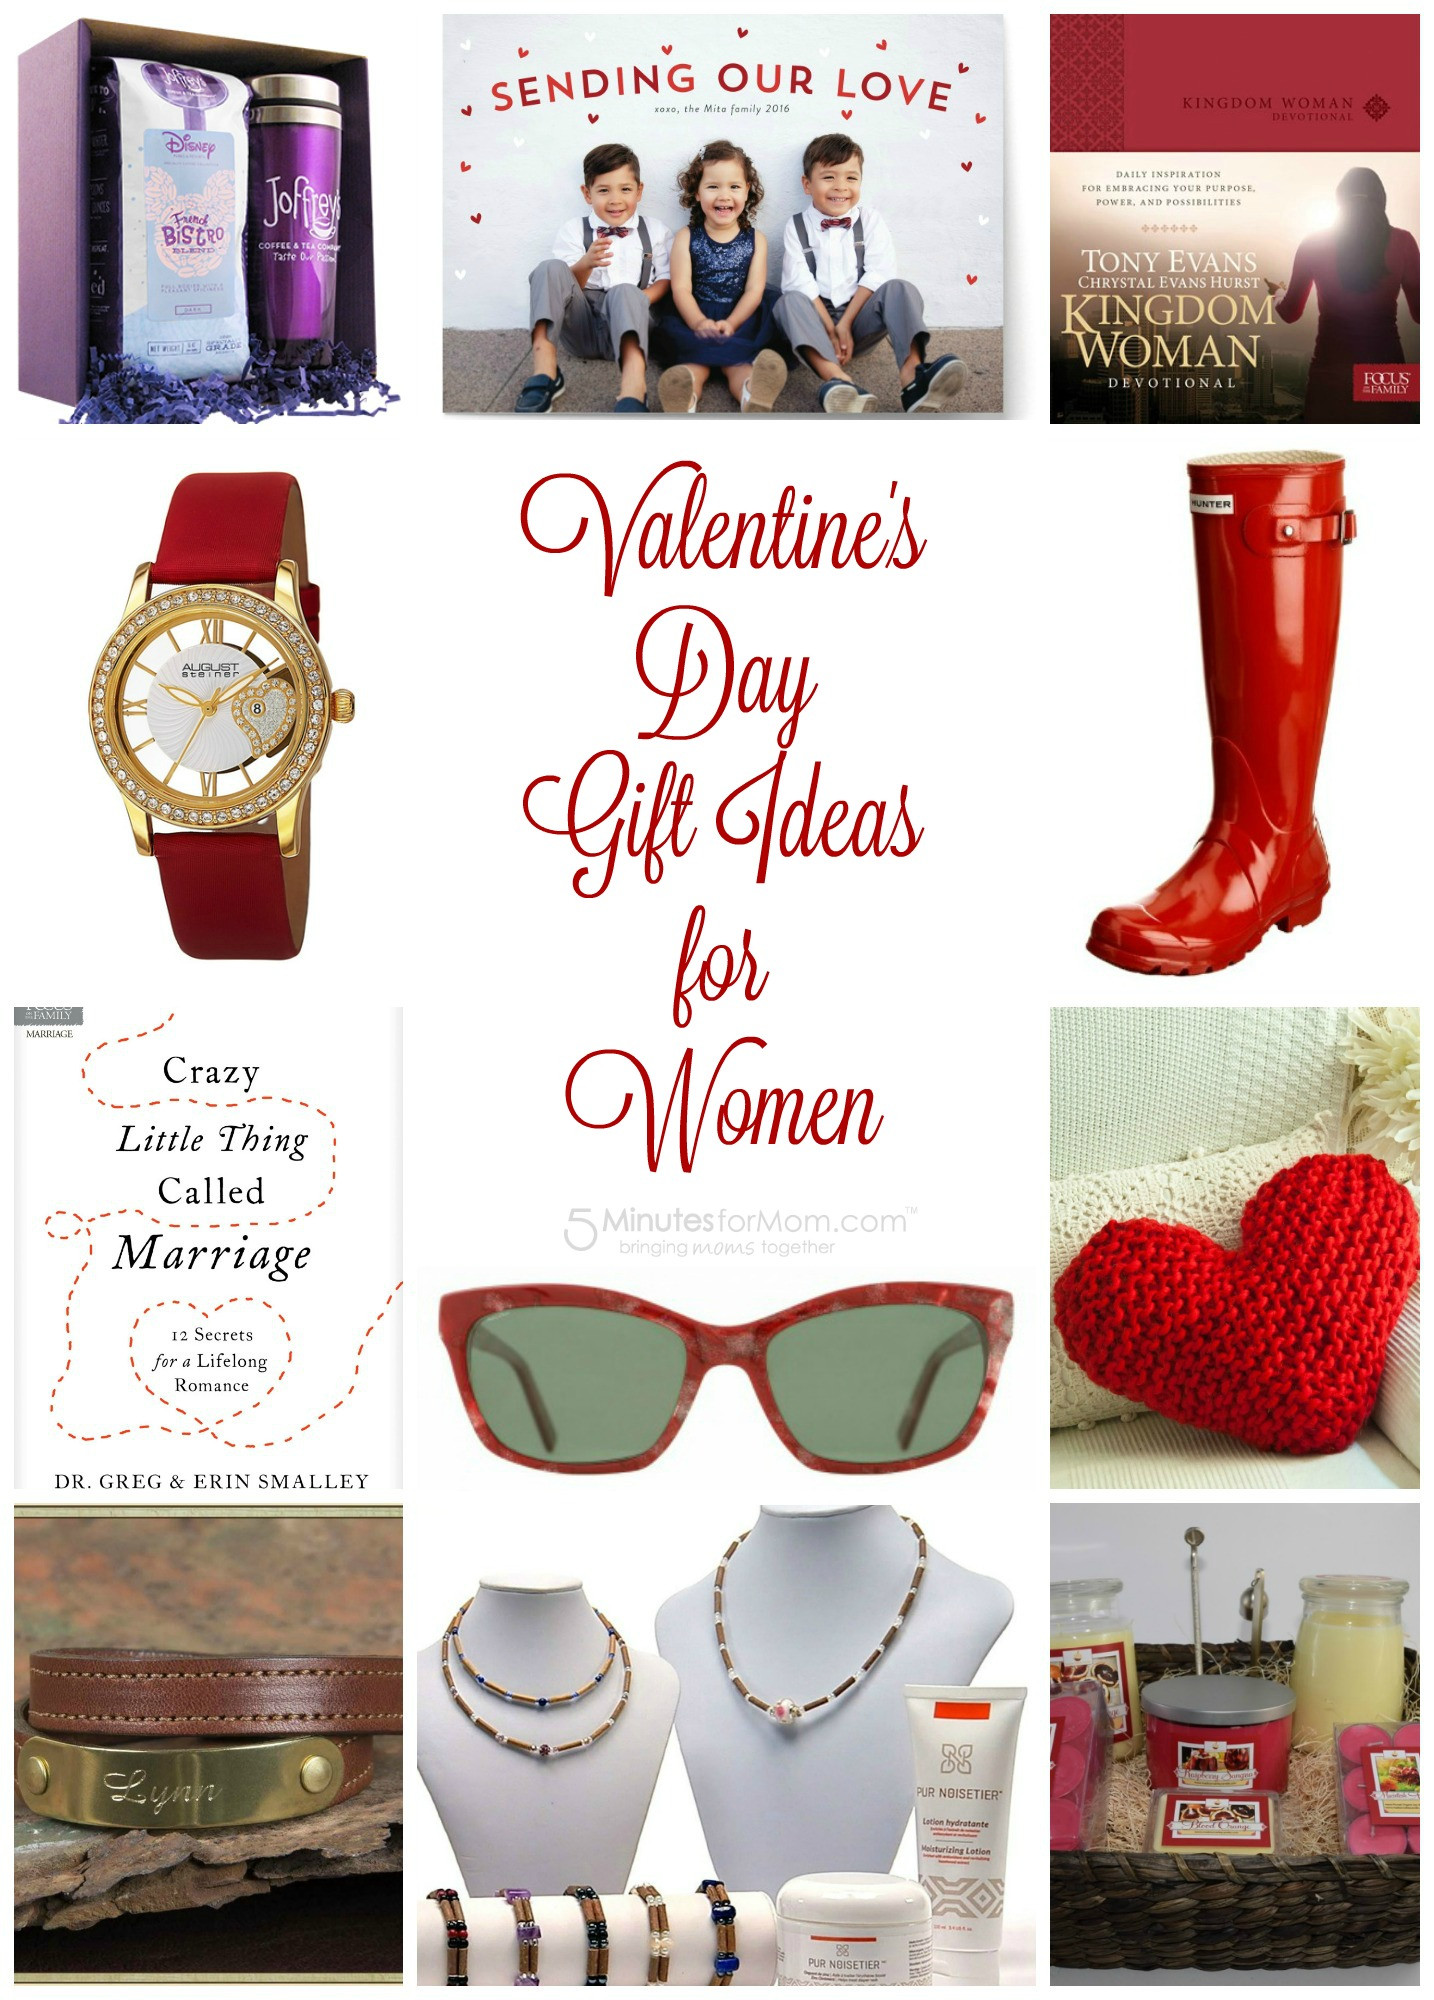 Valentines Gift Ideas For Women
 Valentine s Day Gift Guide for Women Plus $100 Amazon